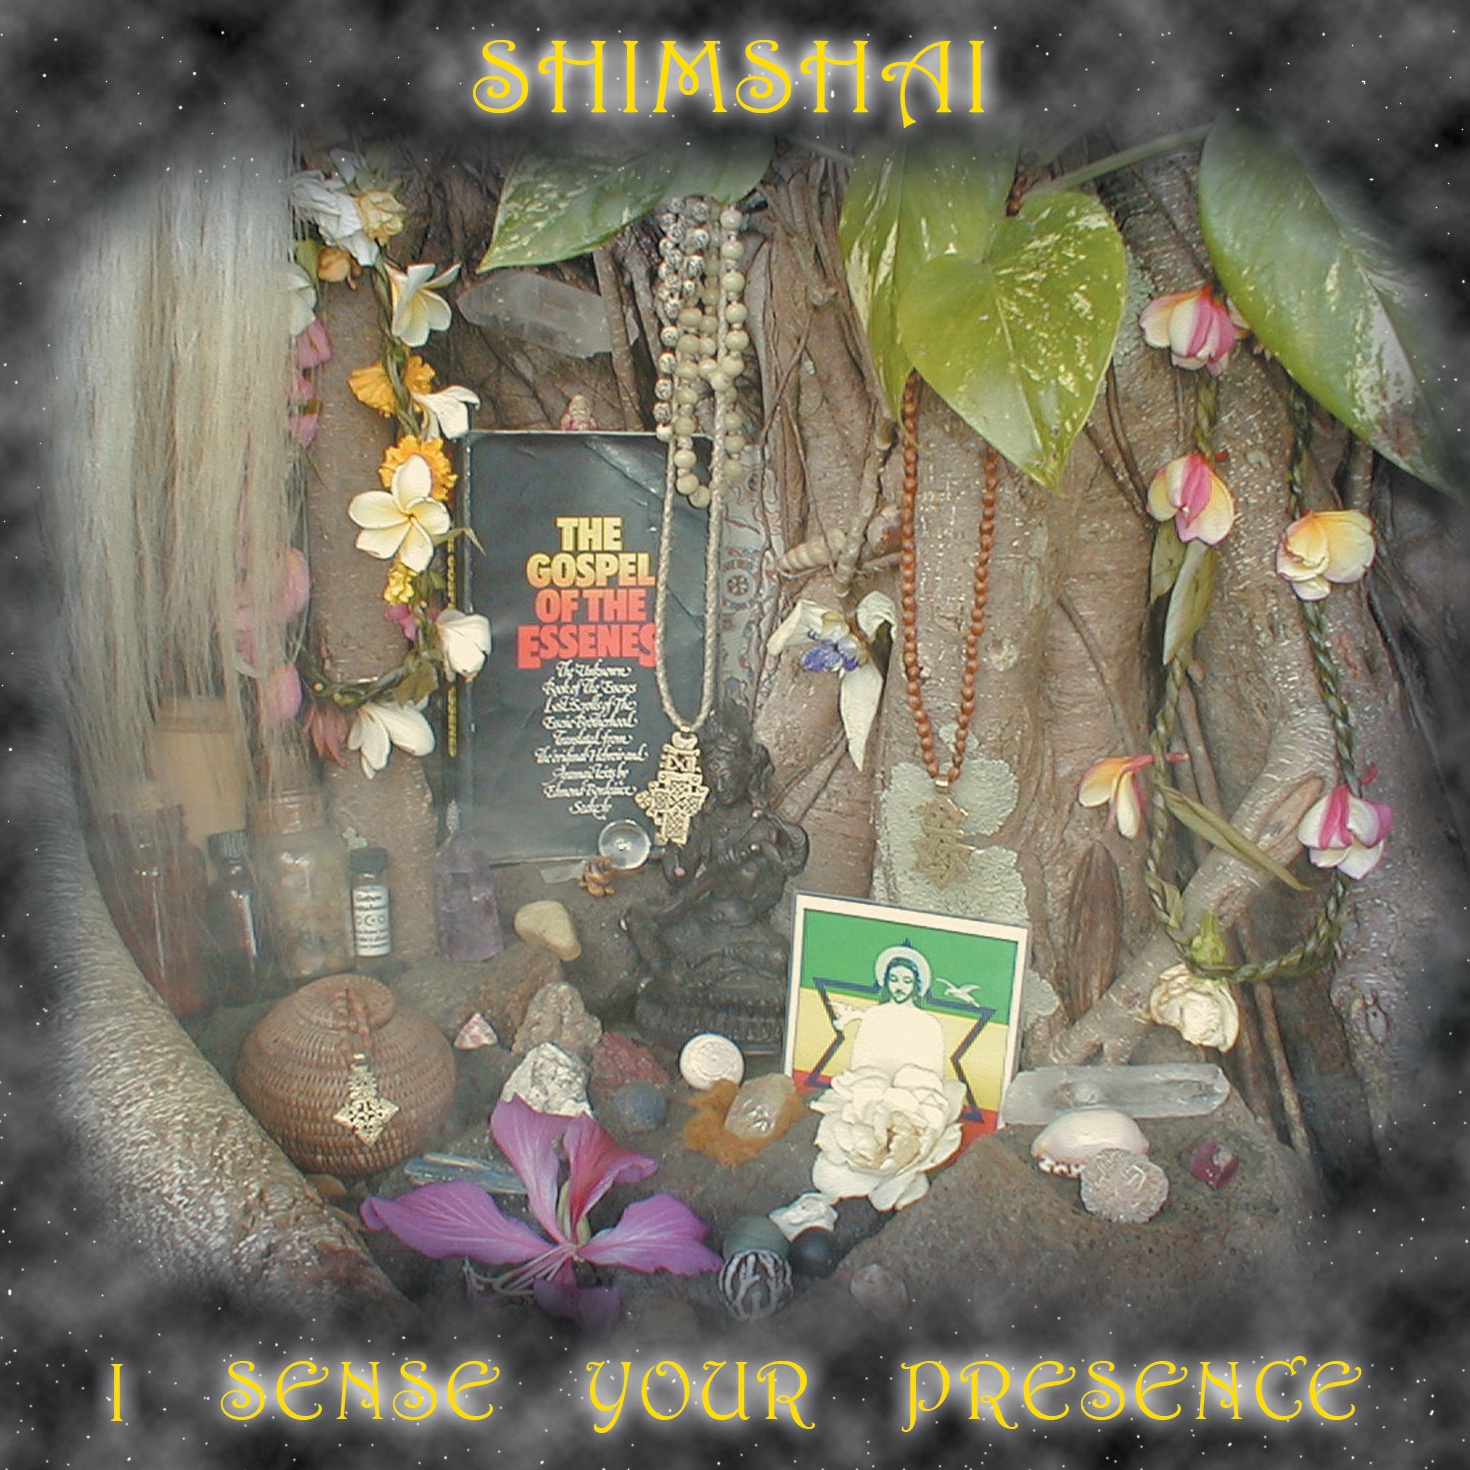 Psalm of Creation by Shimshai from the album I Sense Your Presence, original roots reggae music with a deep spiritual message